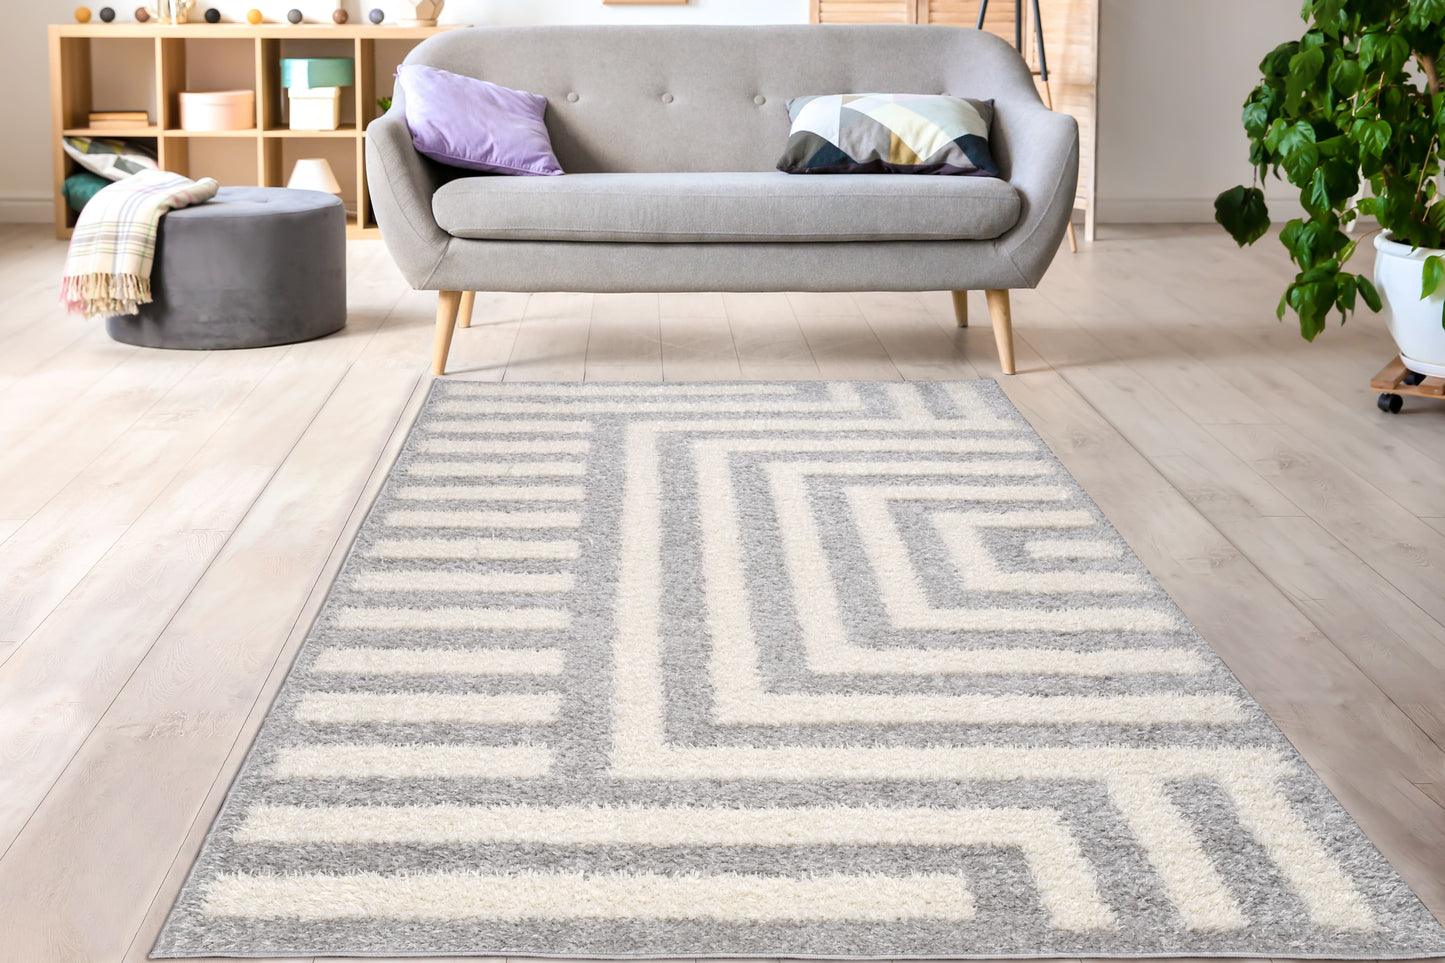 grey off white straped fluffy shaggy minimalistic area rug for living room bedroom 2x5, 3x5 Runner Rug, Entry Way, Entrance, Balcony, Bedside, Home Office, Table Top